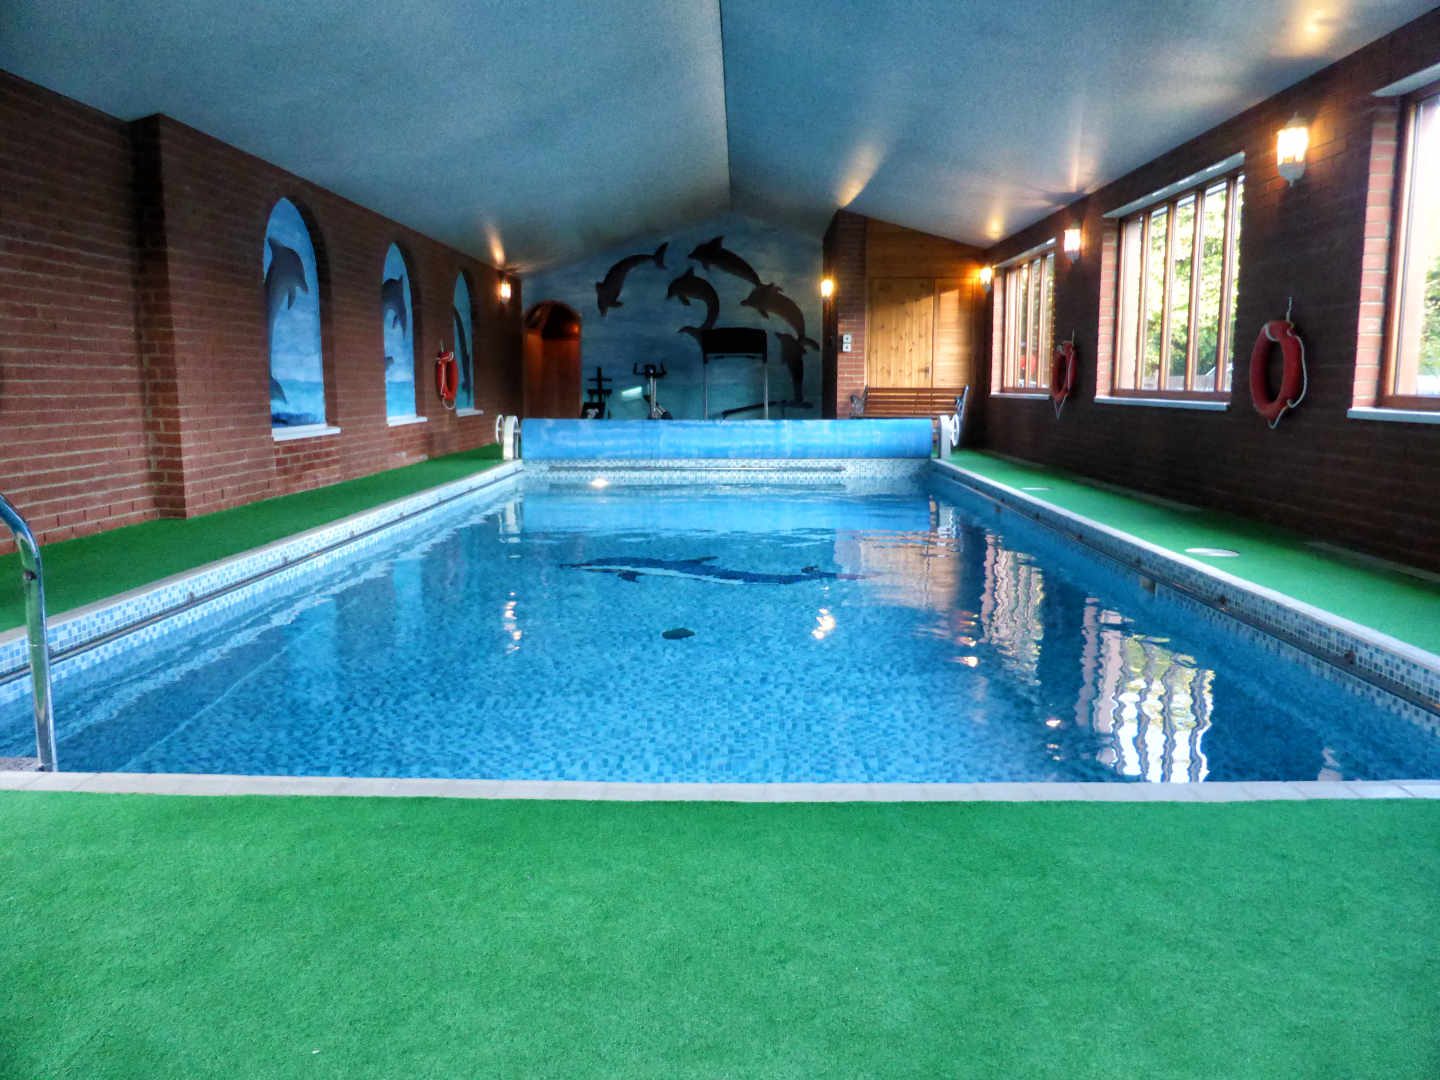 Residents swimming pool